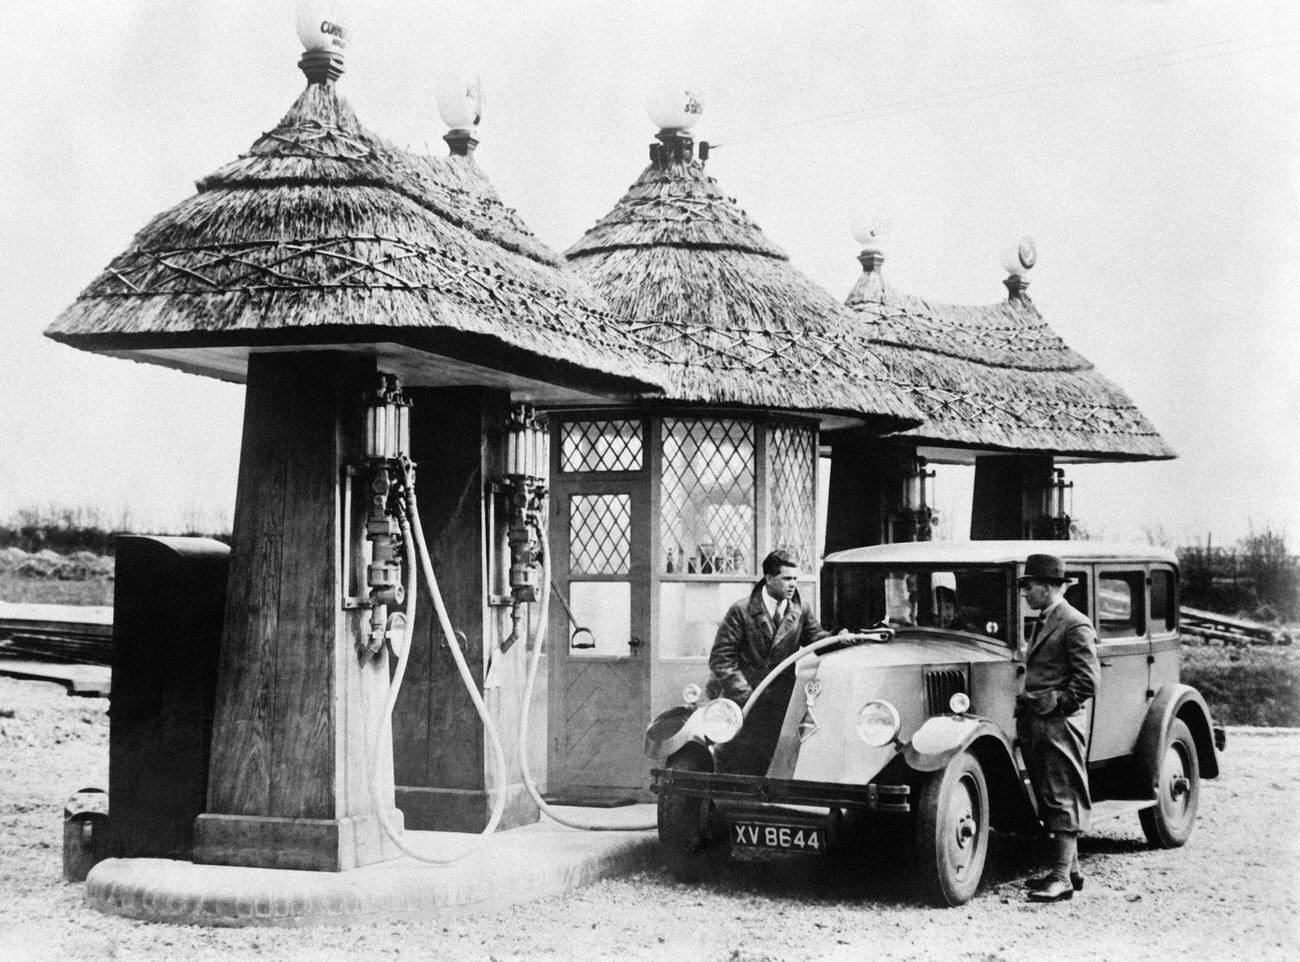 New thatched-roof gas station in England, United Kingdom, 1930.